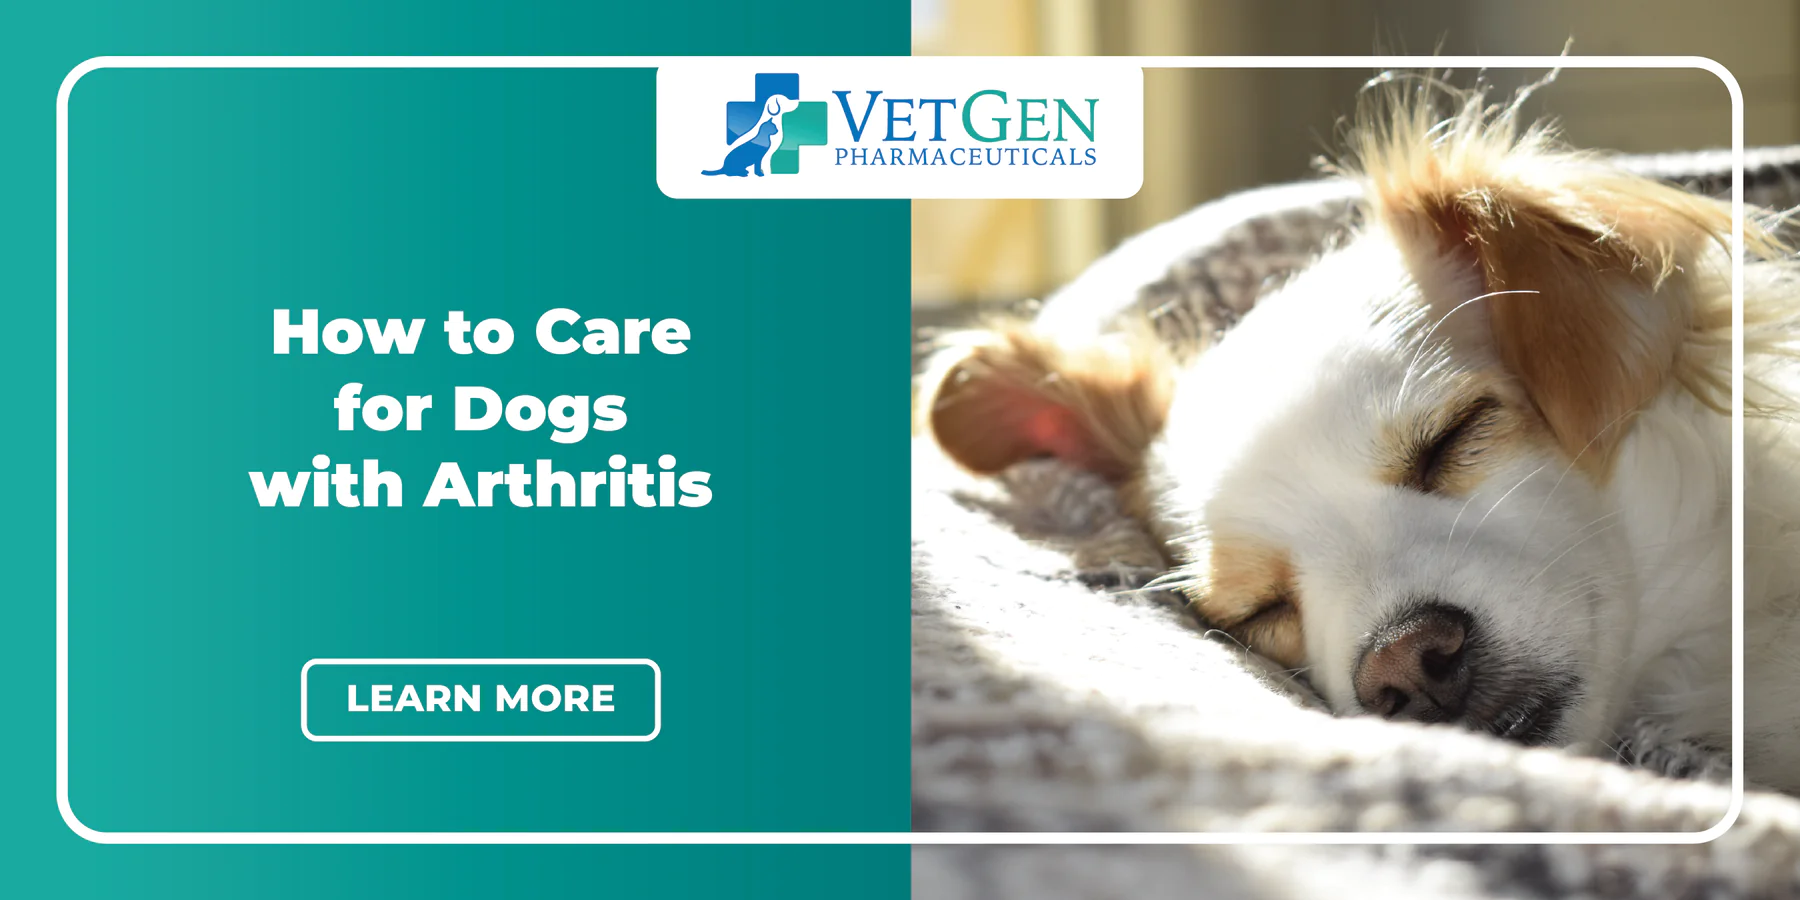 How to Care for Dogs with Arthritis